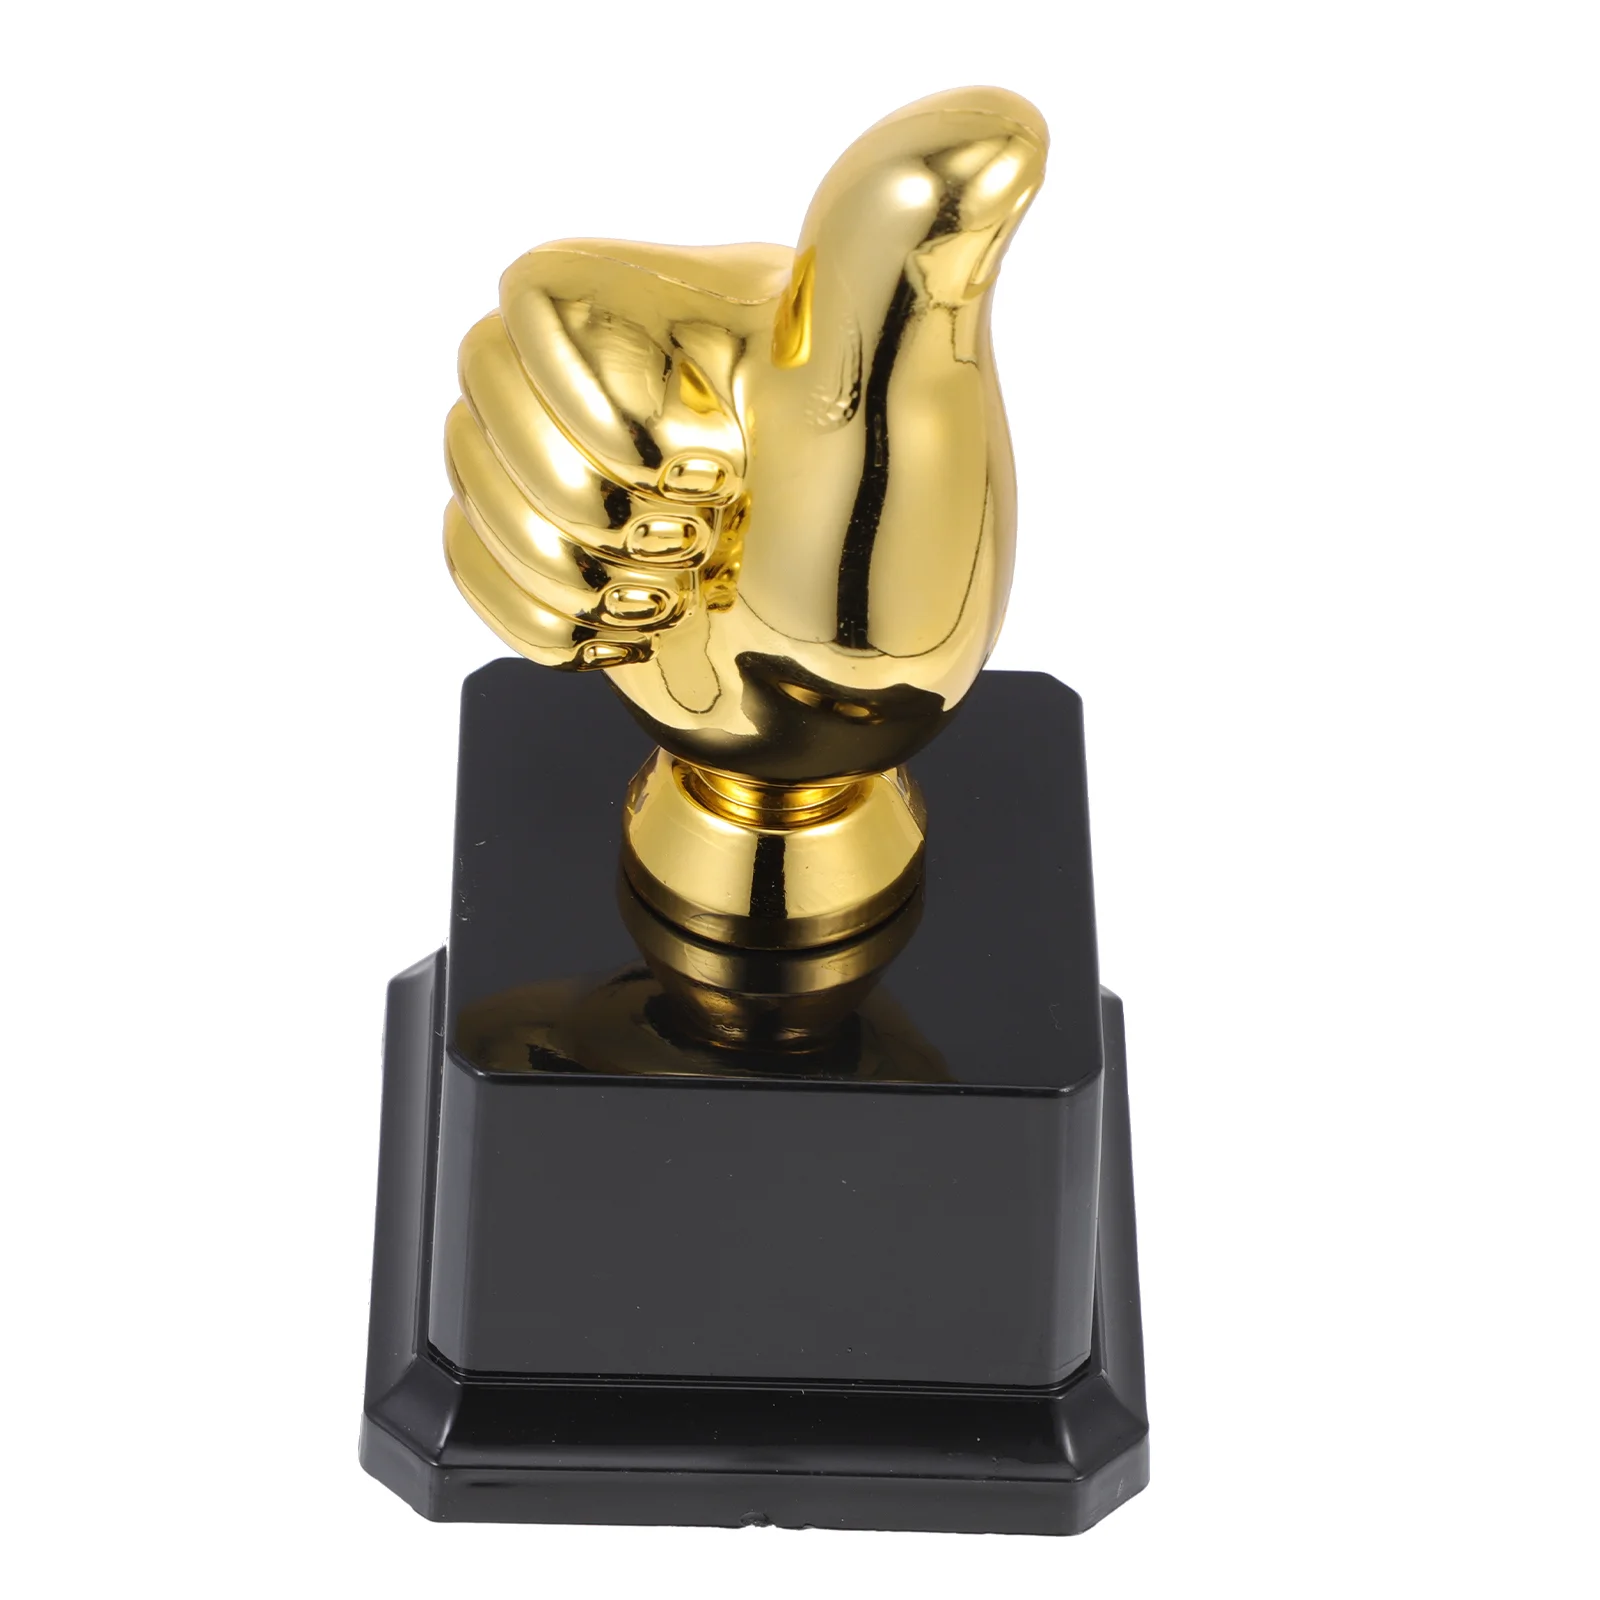 Trophy Awards Thumb Up Award Trophy Awards Plastic Golden Rewards Trophies Gold Awards Trophies Party Favors Sports Competition trophy kids award trophies party star awards five cup point mini sports prize plastic gold cups decor toy winning medals trophie